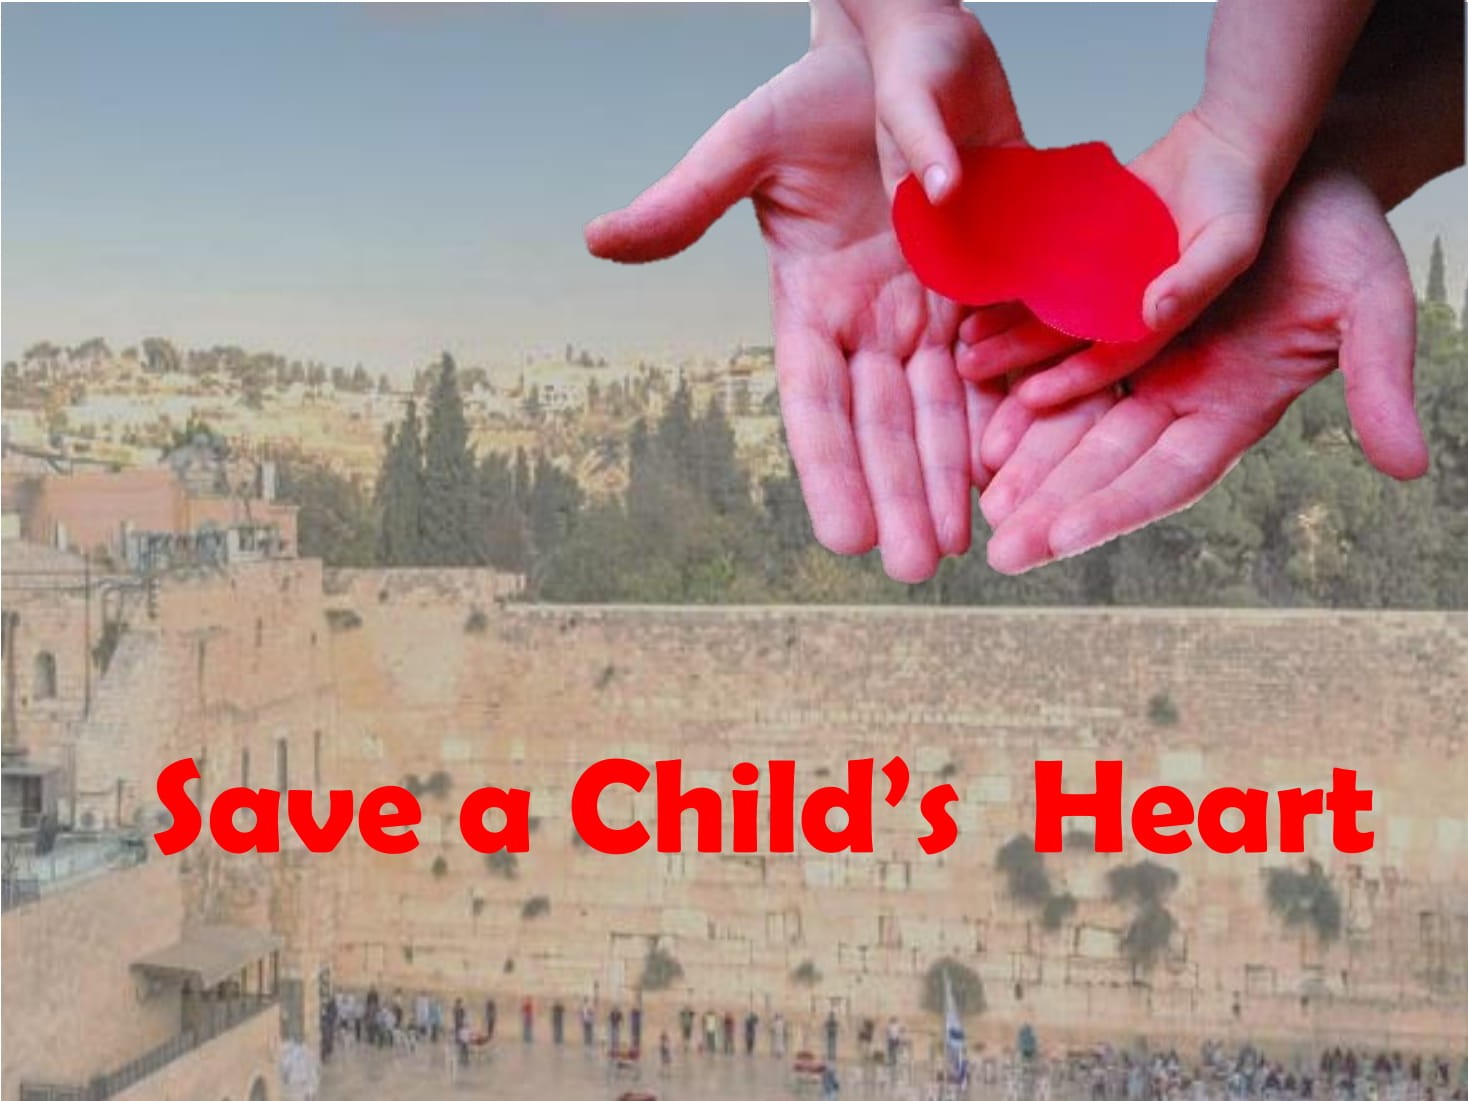 SAVE A CHILD'S HEART